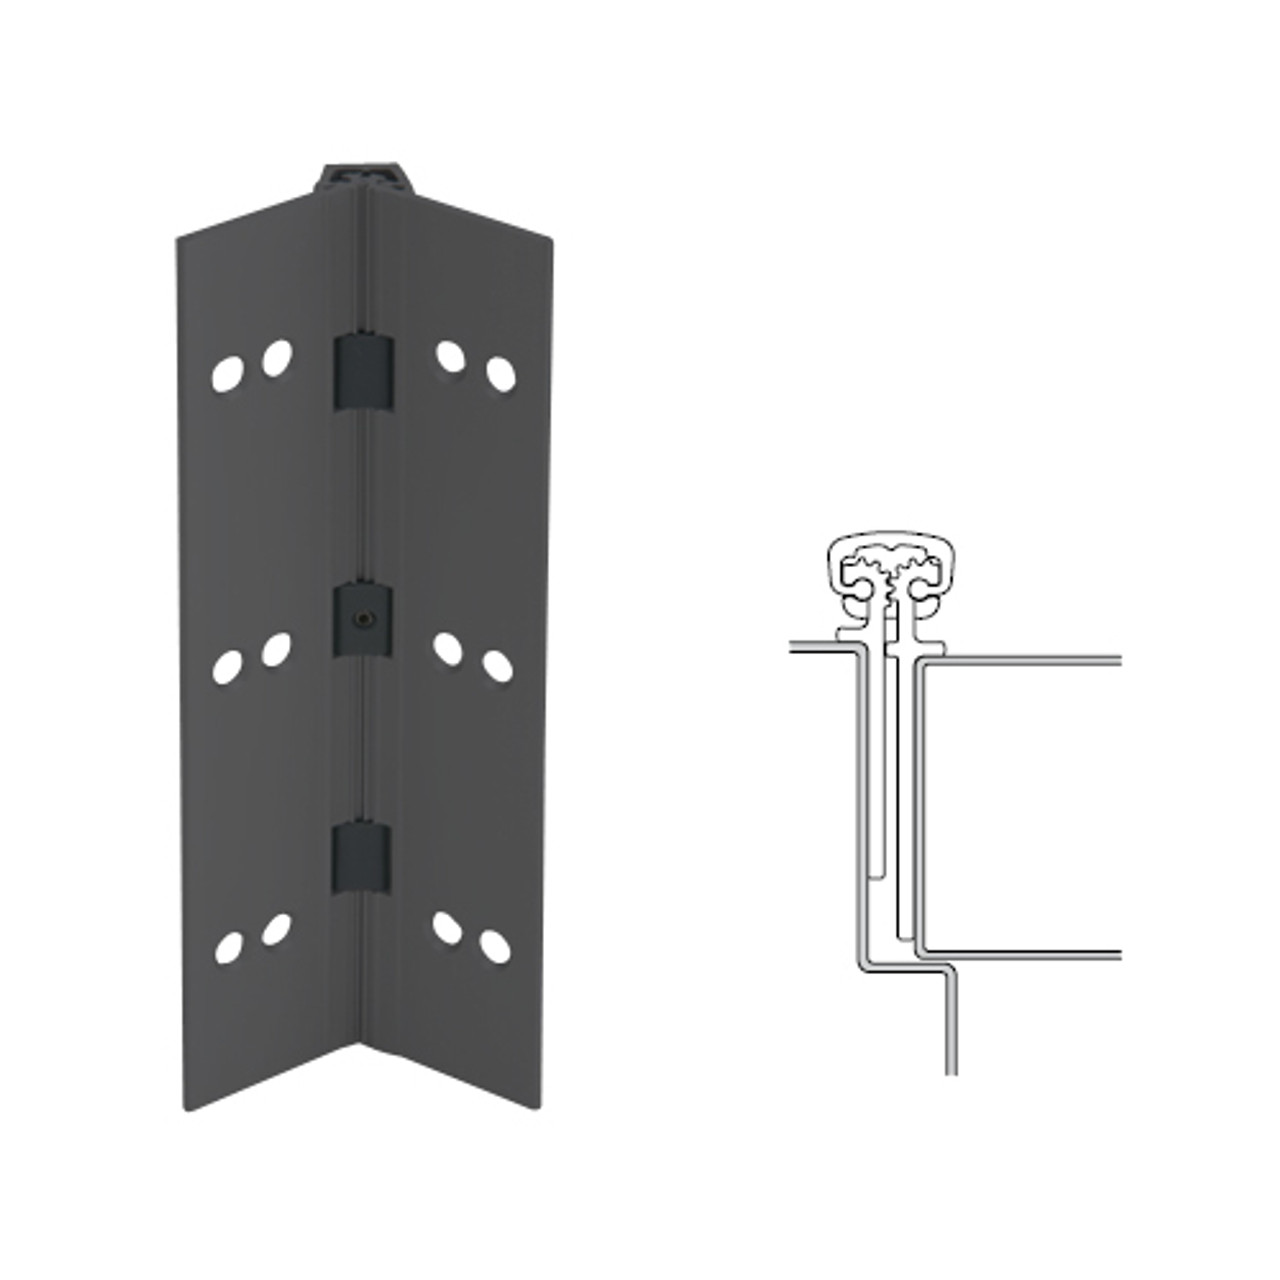 026XY-315AN-85-TEKWD IVES Full Mortise Continuous Geared Hinges with Wood Screws in Anodized Black